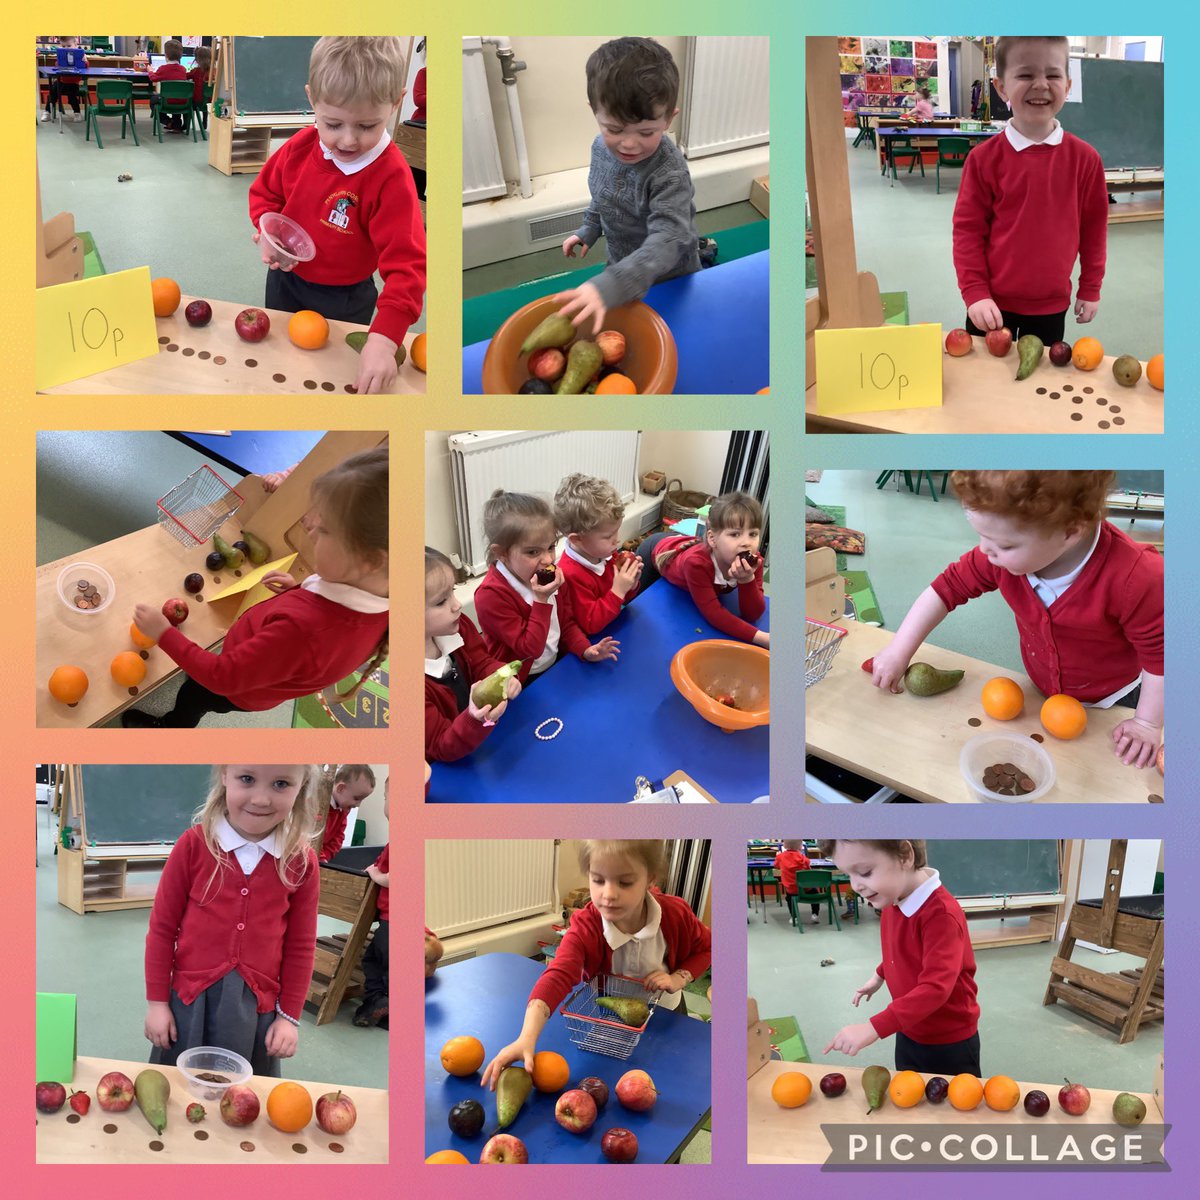 The very hungry caterpillar 🐛 fruit shop in Nursery #ambitiouscapablelearners #healthyconfidentindividuals